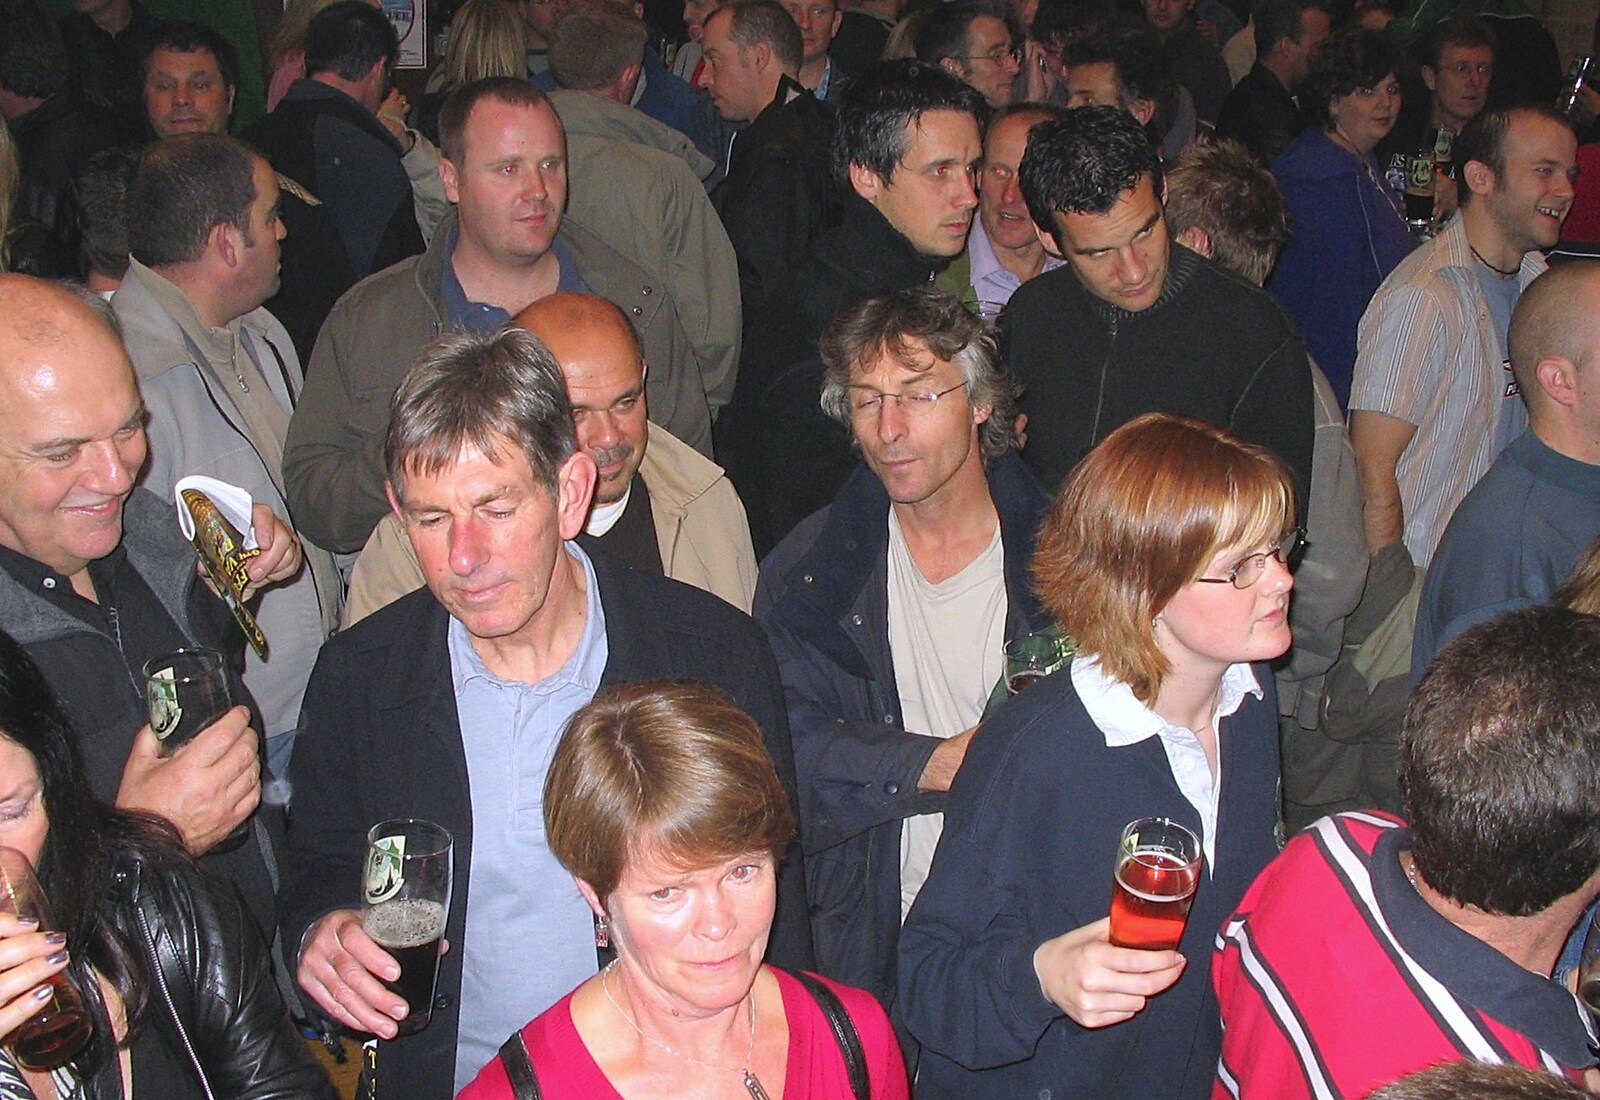 The crowd sways heads to the music from The Norfolk and Norwich Beer Festival, St. Andrew's Hall, Norwich - 27th October 2004